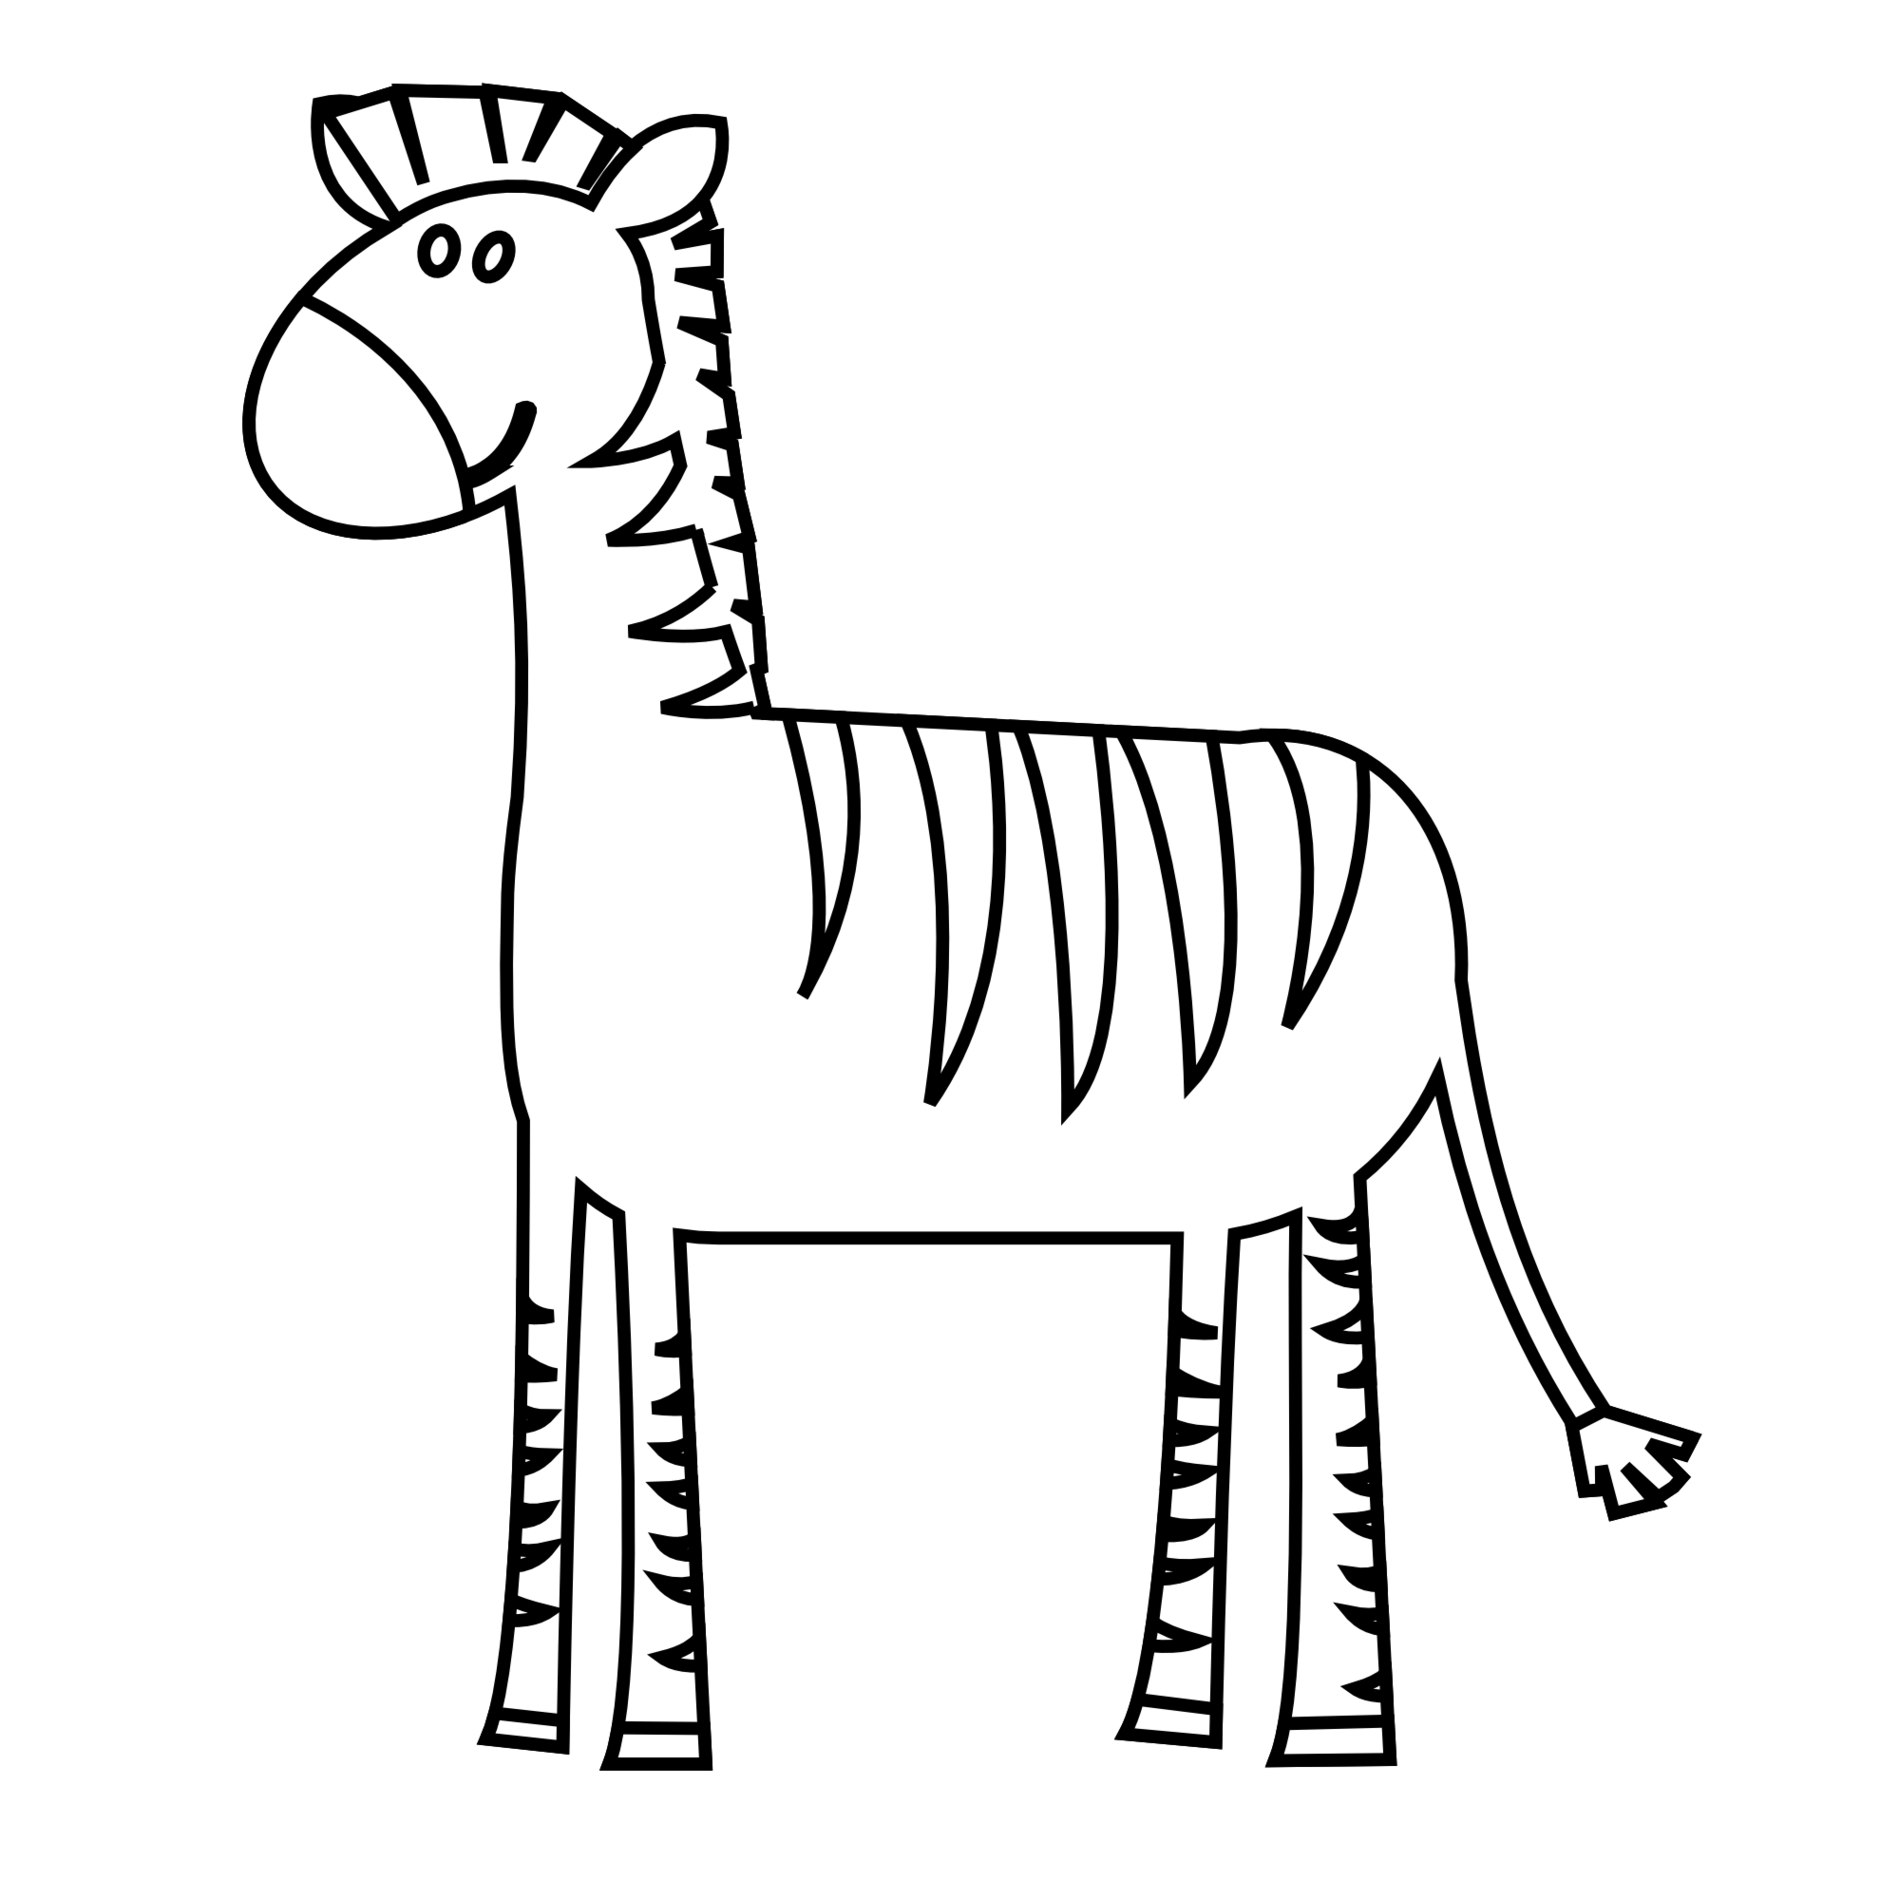 Zebra Line Drawing Clipart - Free to use Clip Art Resource